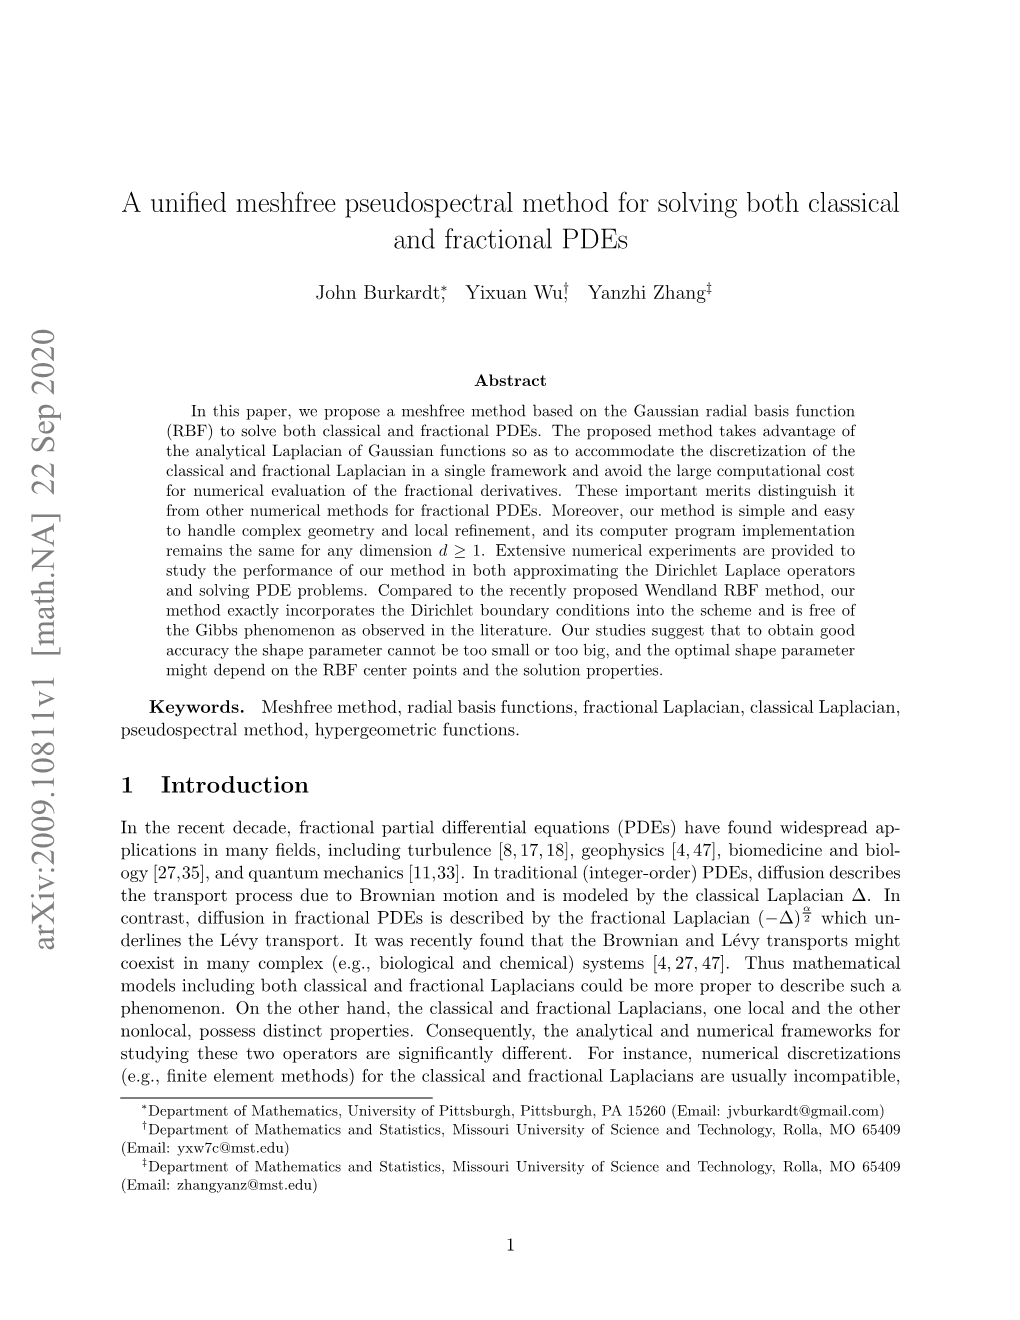 A Unified Meshfree Pseudospectral Method for Solving Both Classical